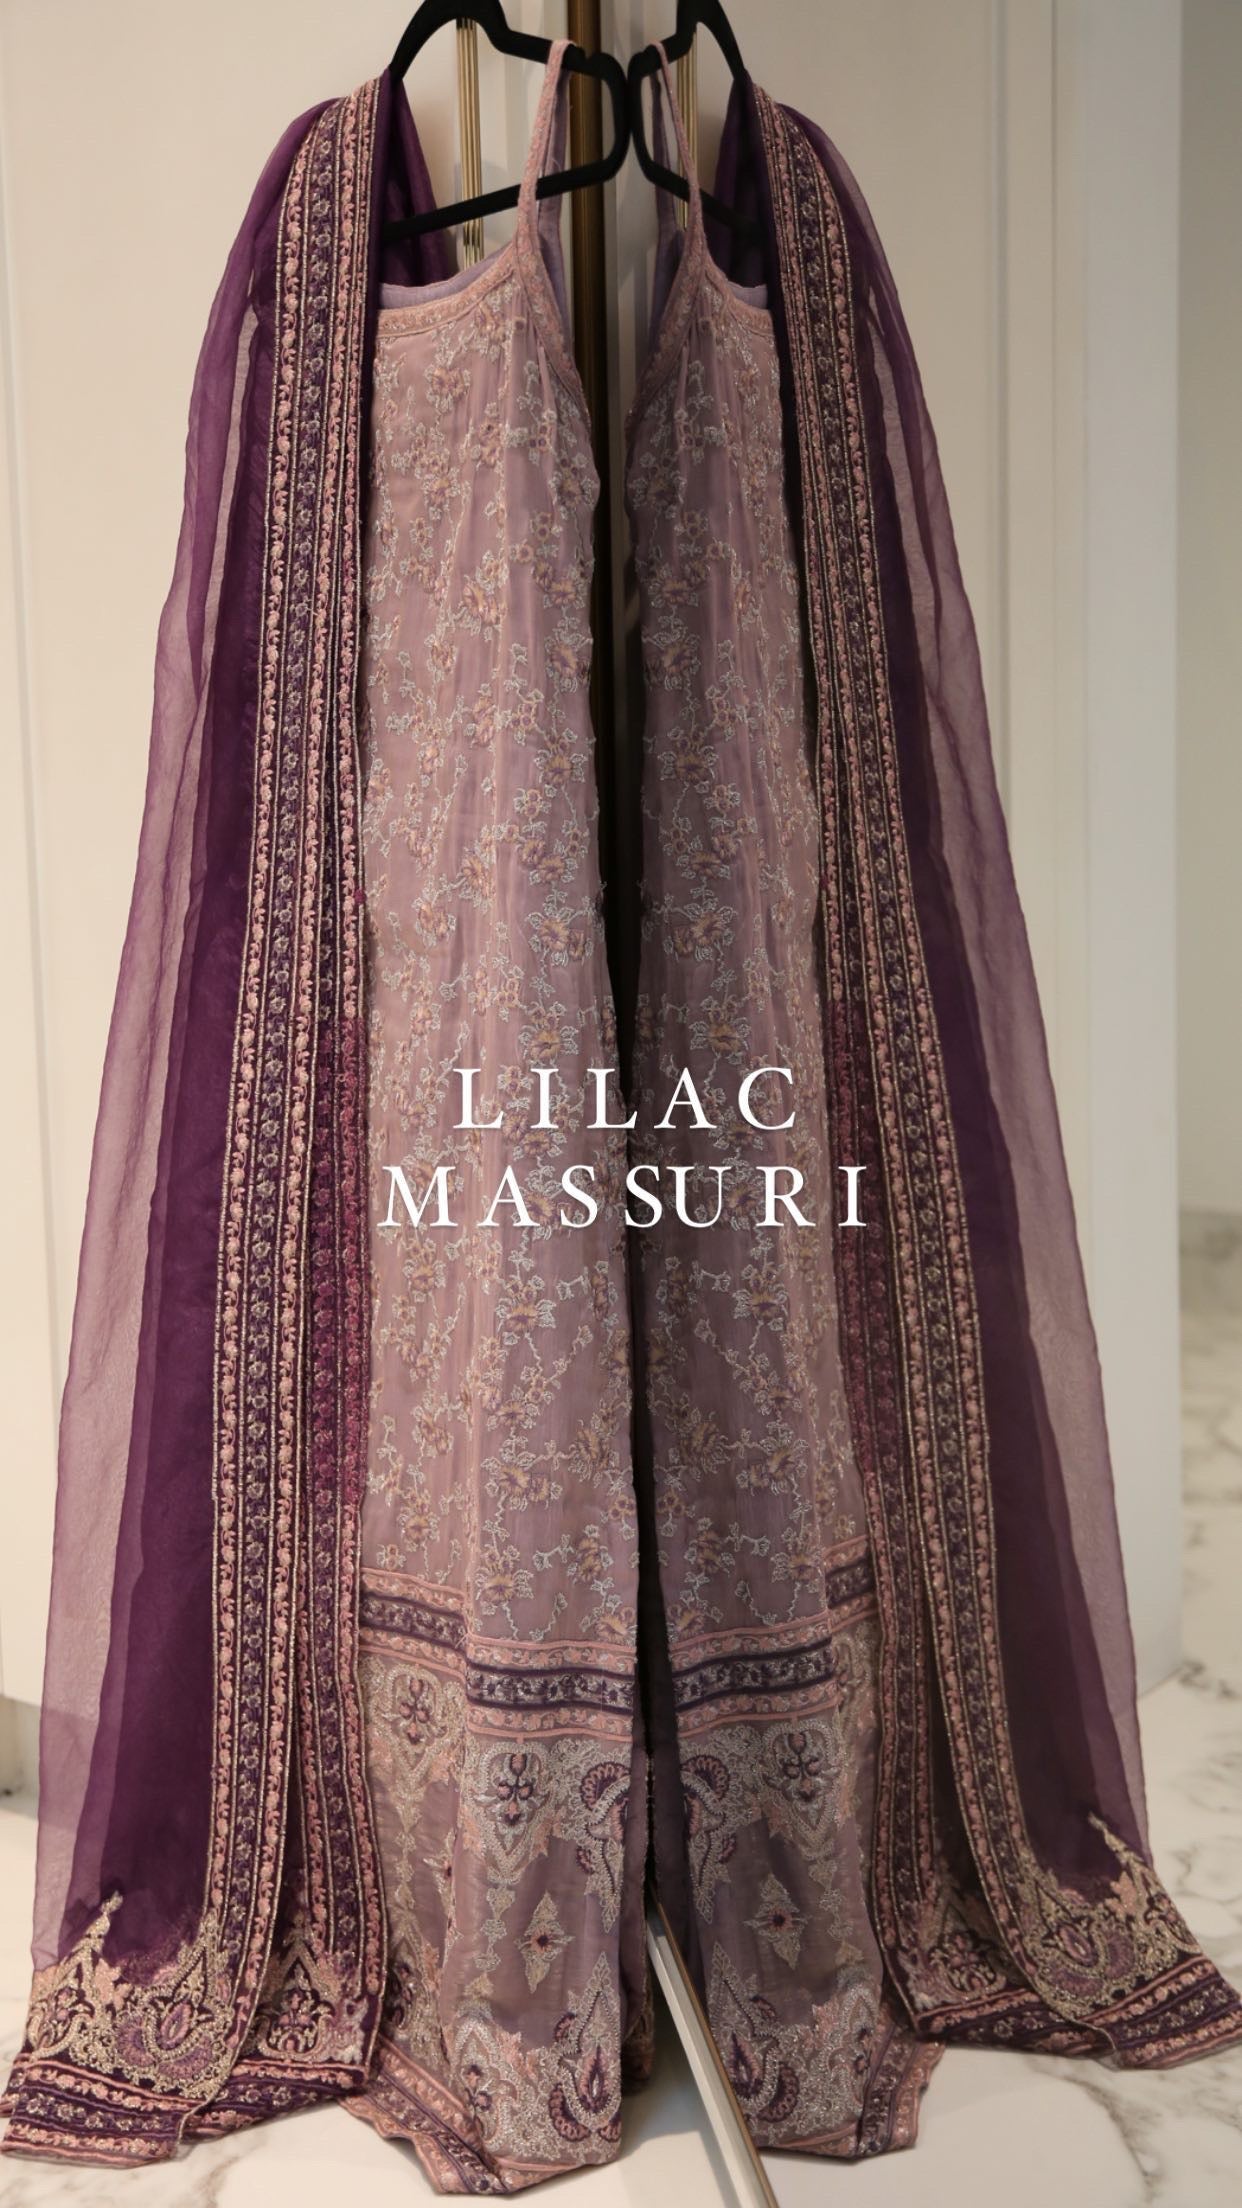 Lilac Massuri Attached Full Sleeves - SIZE SMALL READY TO SHIP